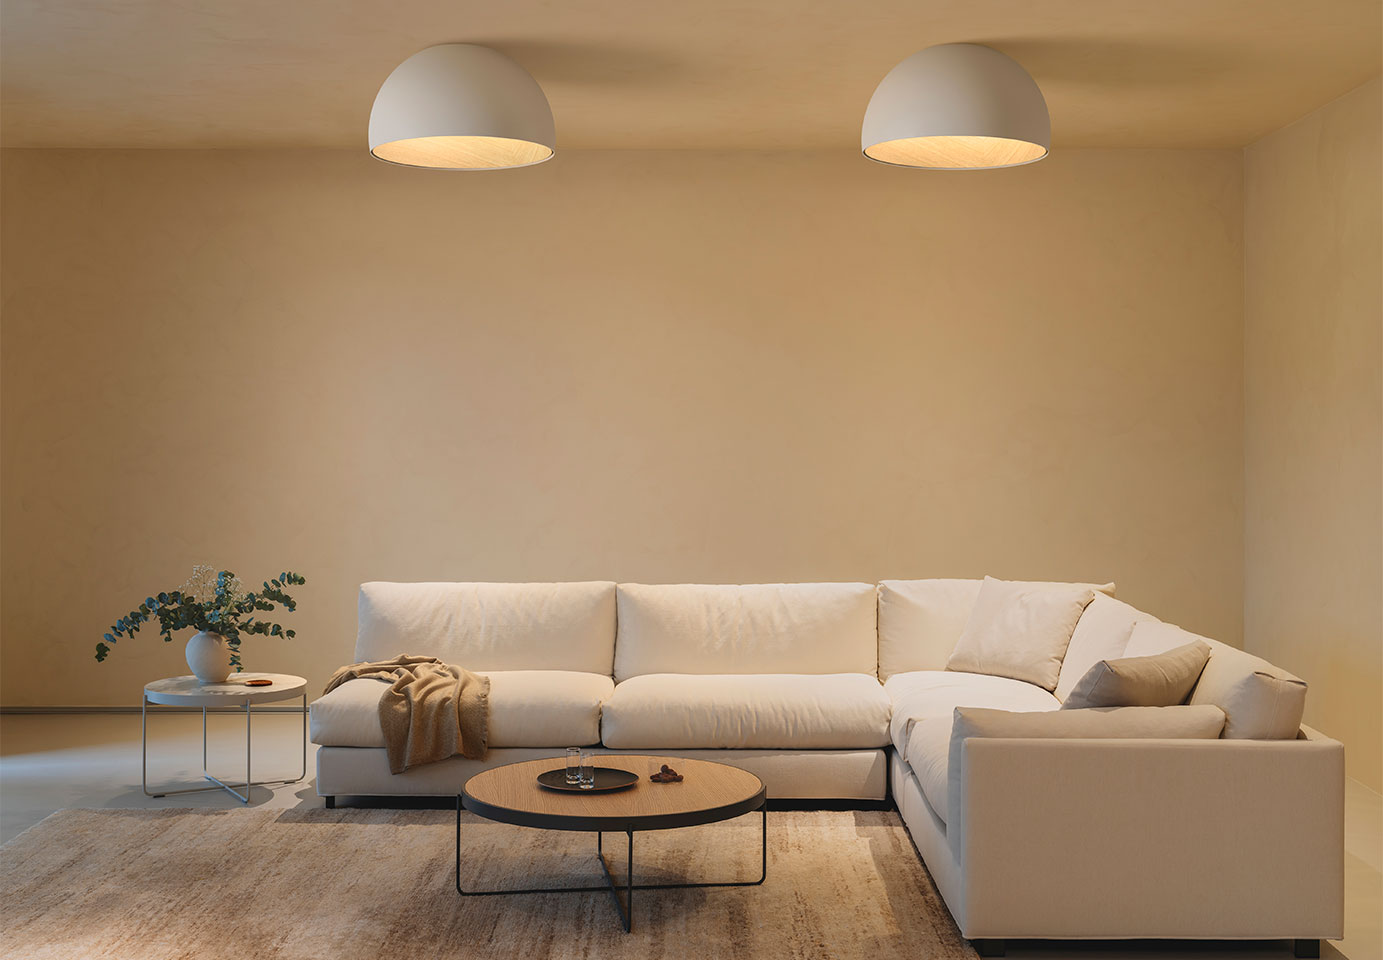 Vibia The Edit - Atmospheres designed for winter wellbeing